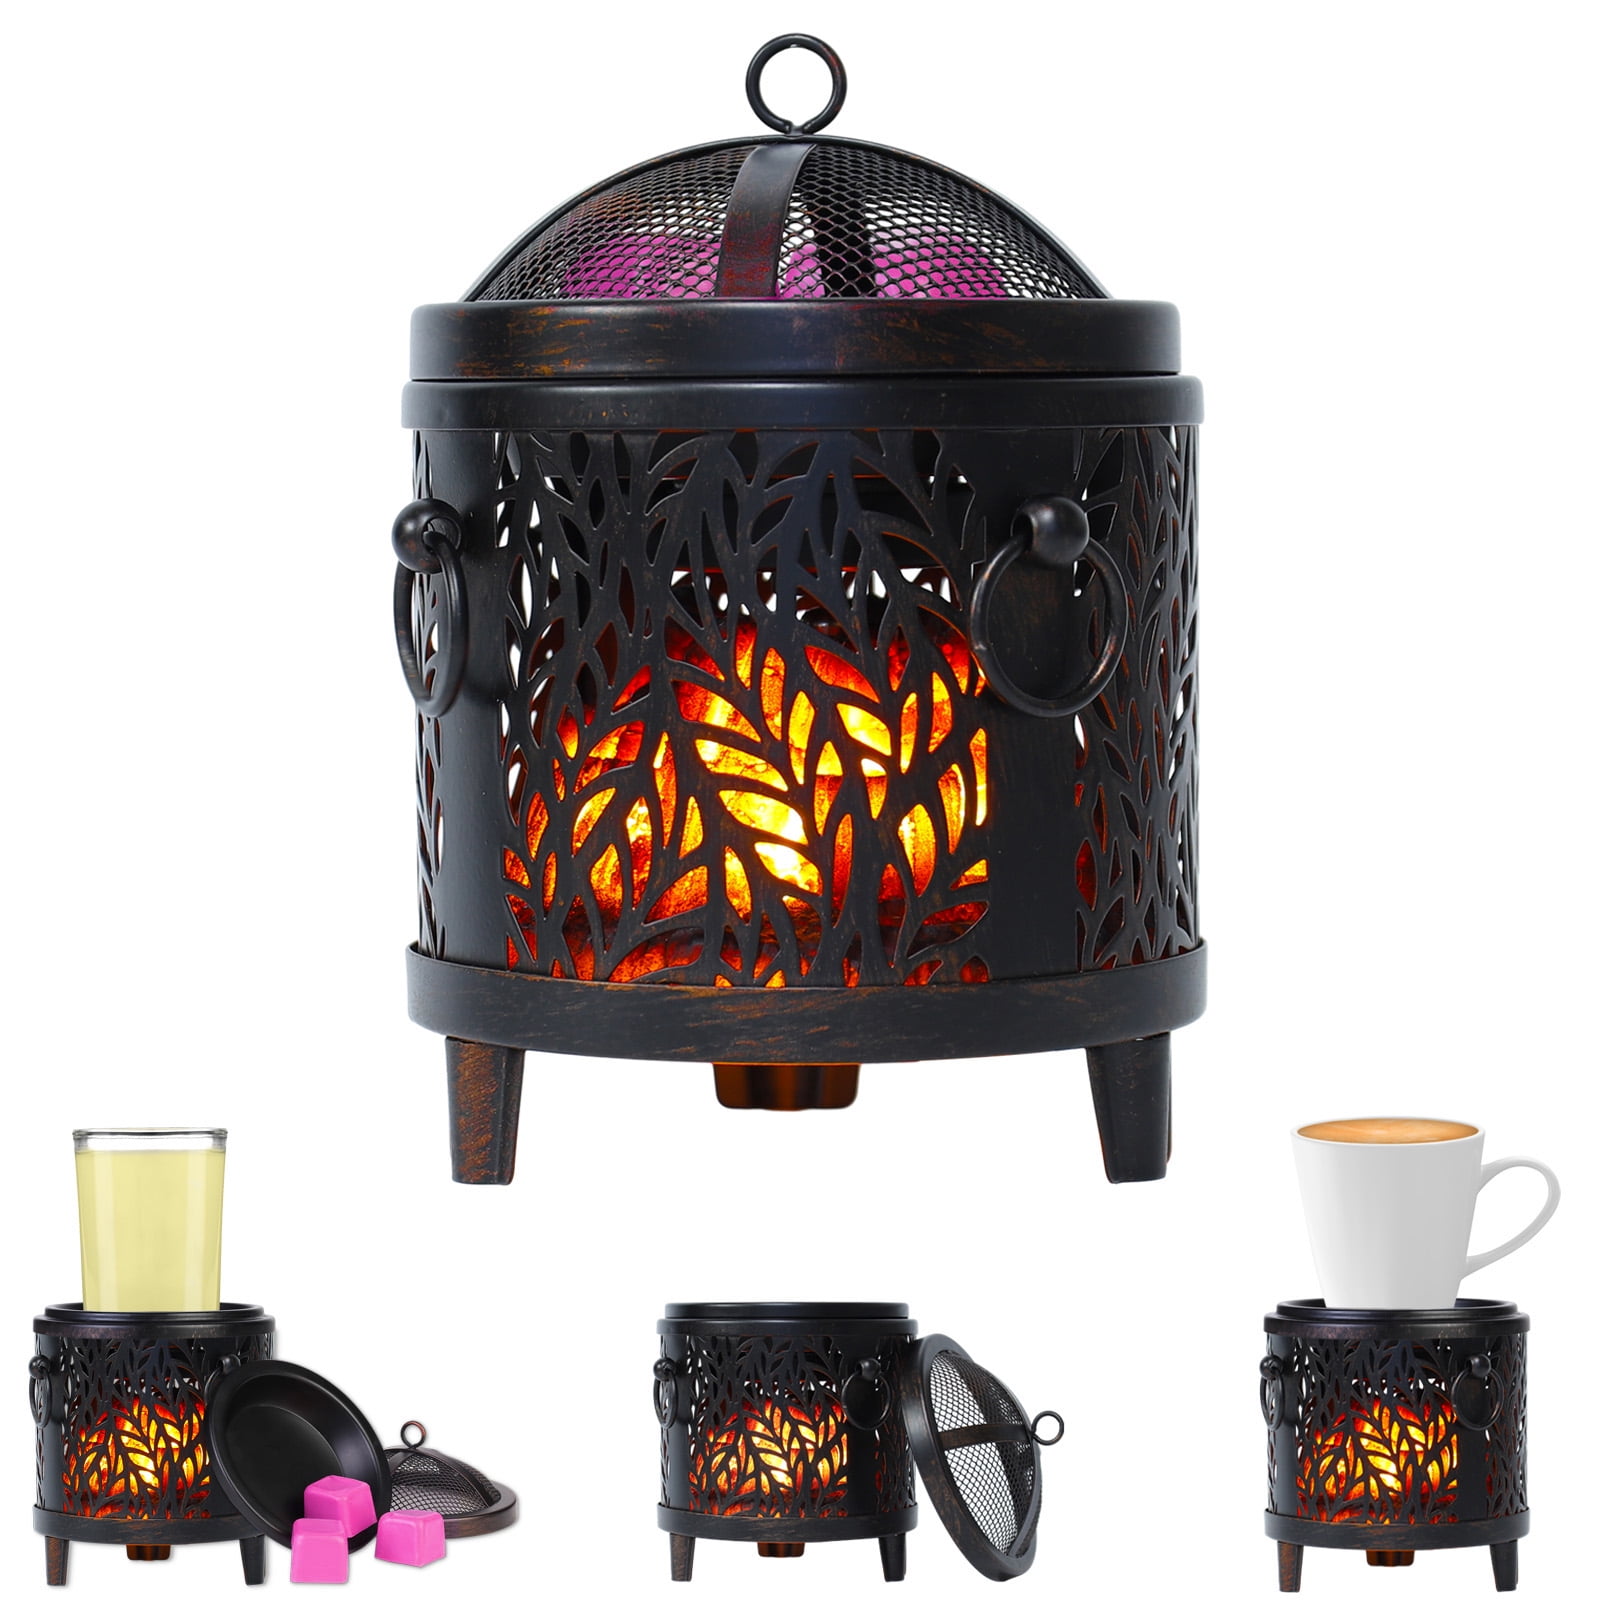  Home-X Glowing Fireplace Wax Warmer, Electric Plug-in Wax  Melter for Scented Wax, Candle Wax Burner with Rustic Design, Wax Tart  Scents Melter, Ideal for Home Fragrance and Décor, Cherrywood : Home